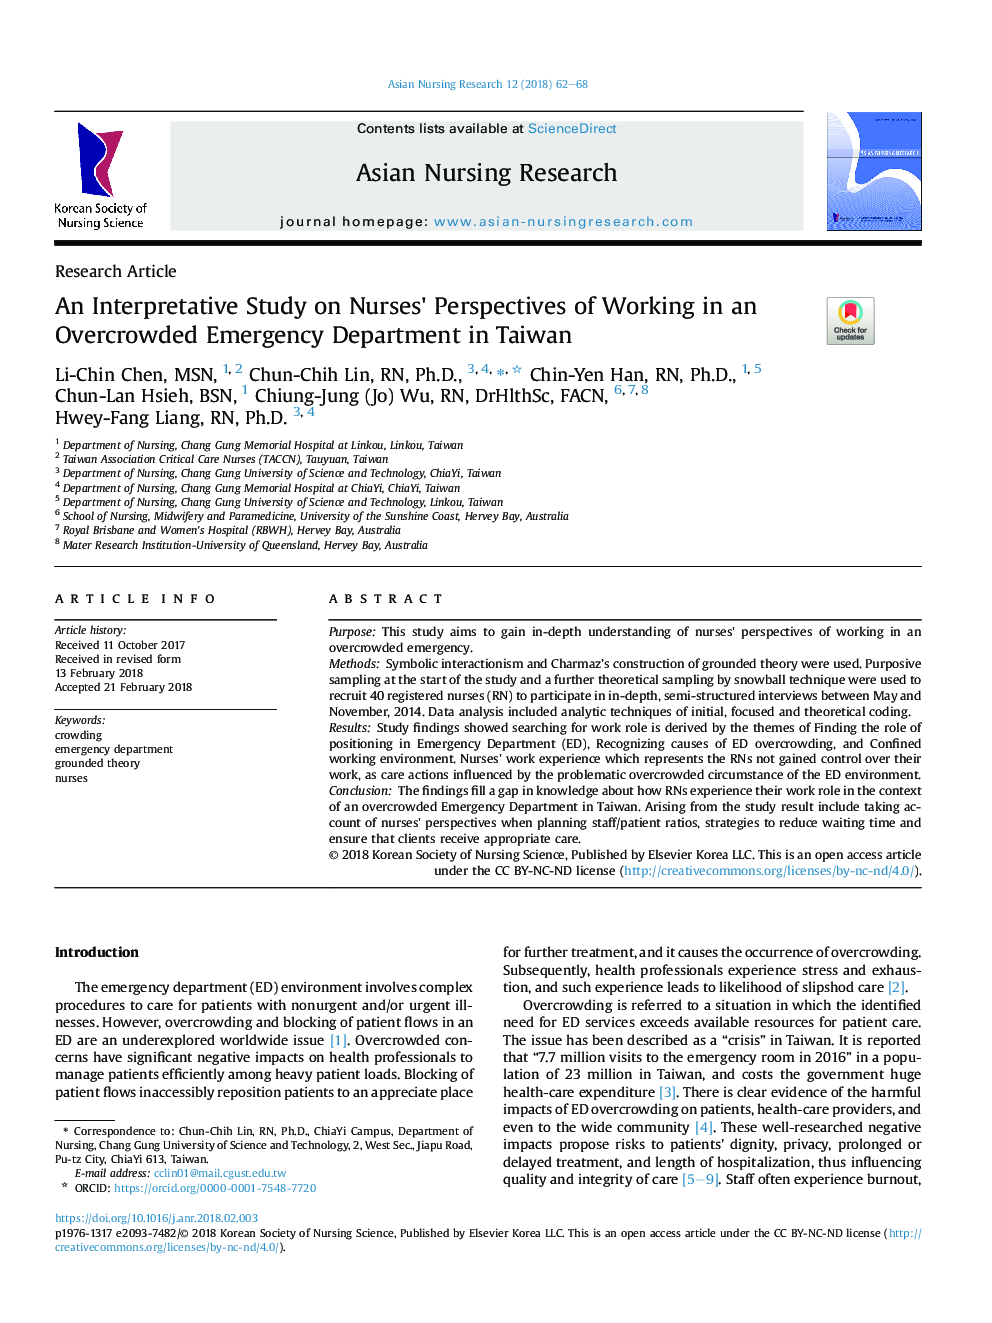 An Interpretative Study on Nurses' Perspectives of Working in an Overcrowded Emergency Department in Taiwan